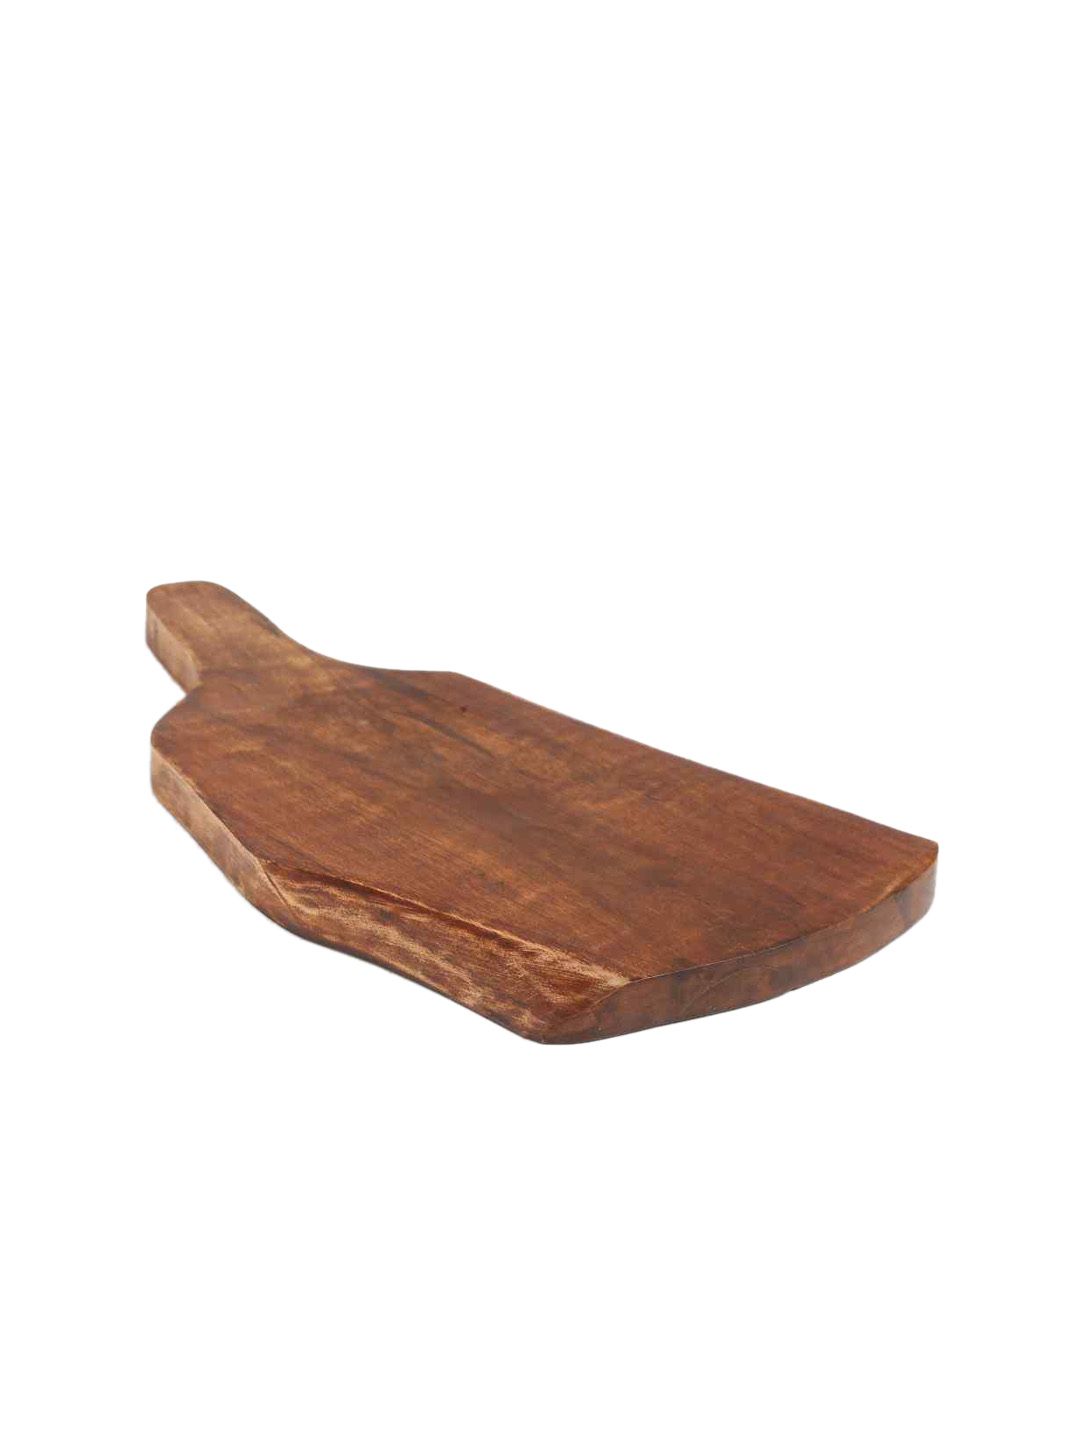 Amoliconcepts Brown Wooden Chopping Board Price in India